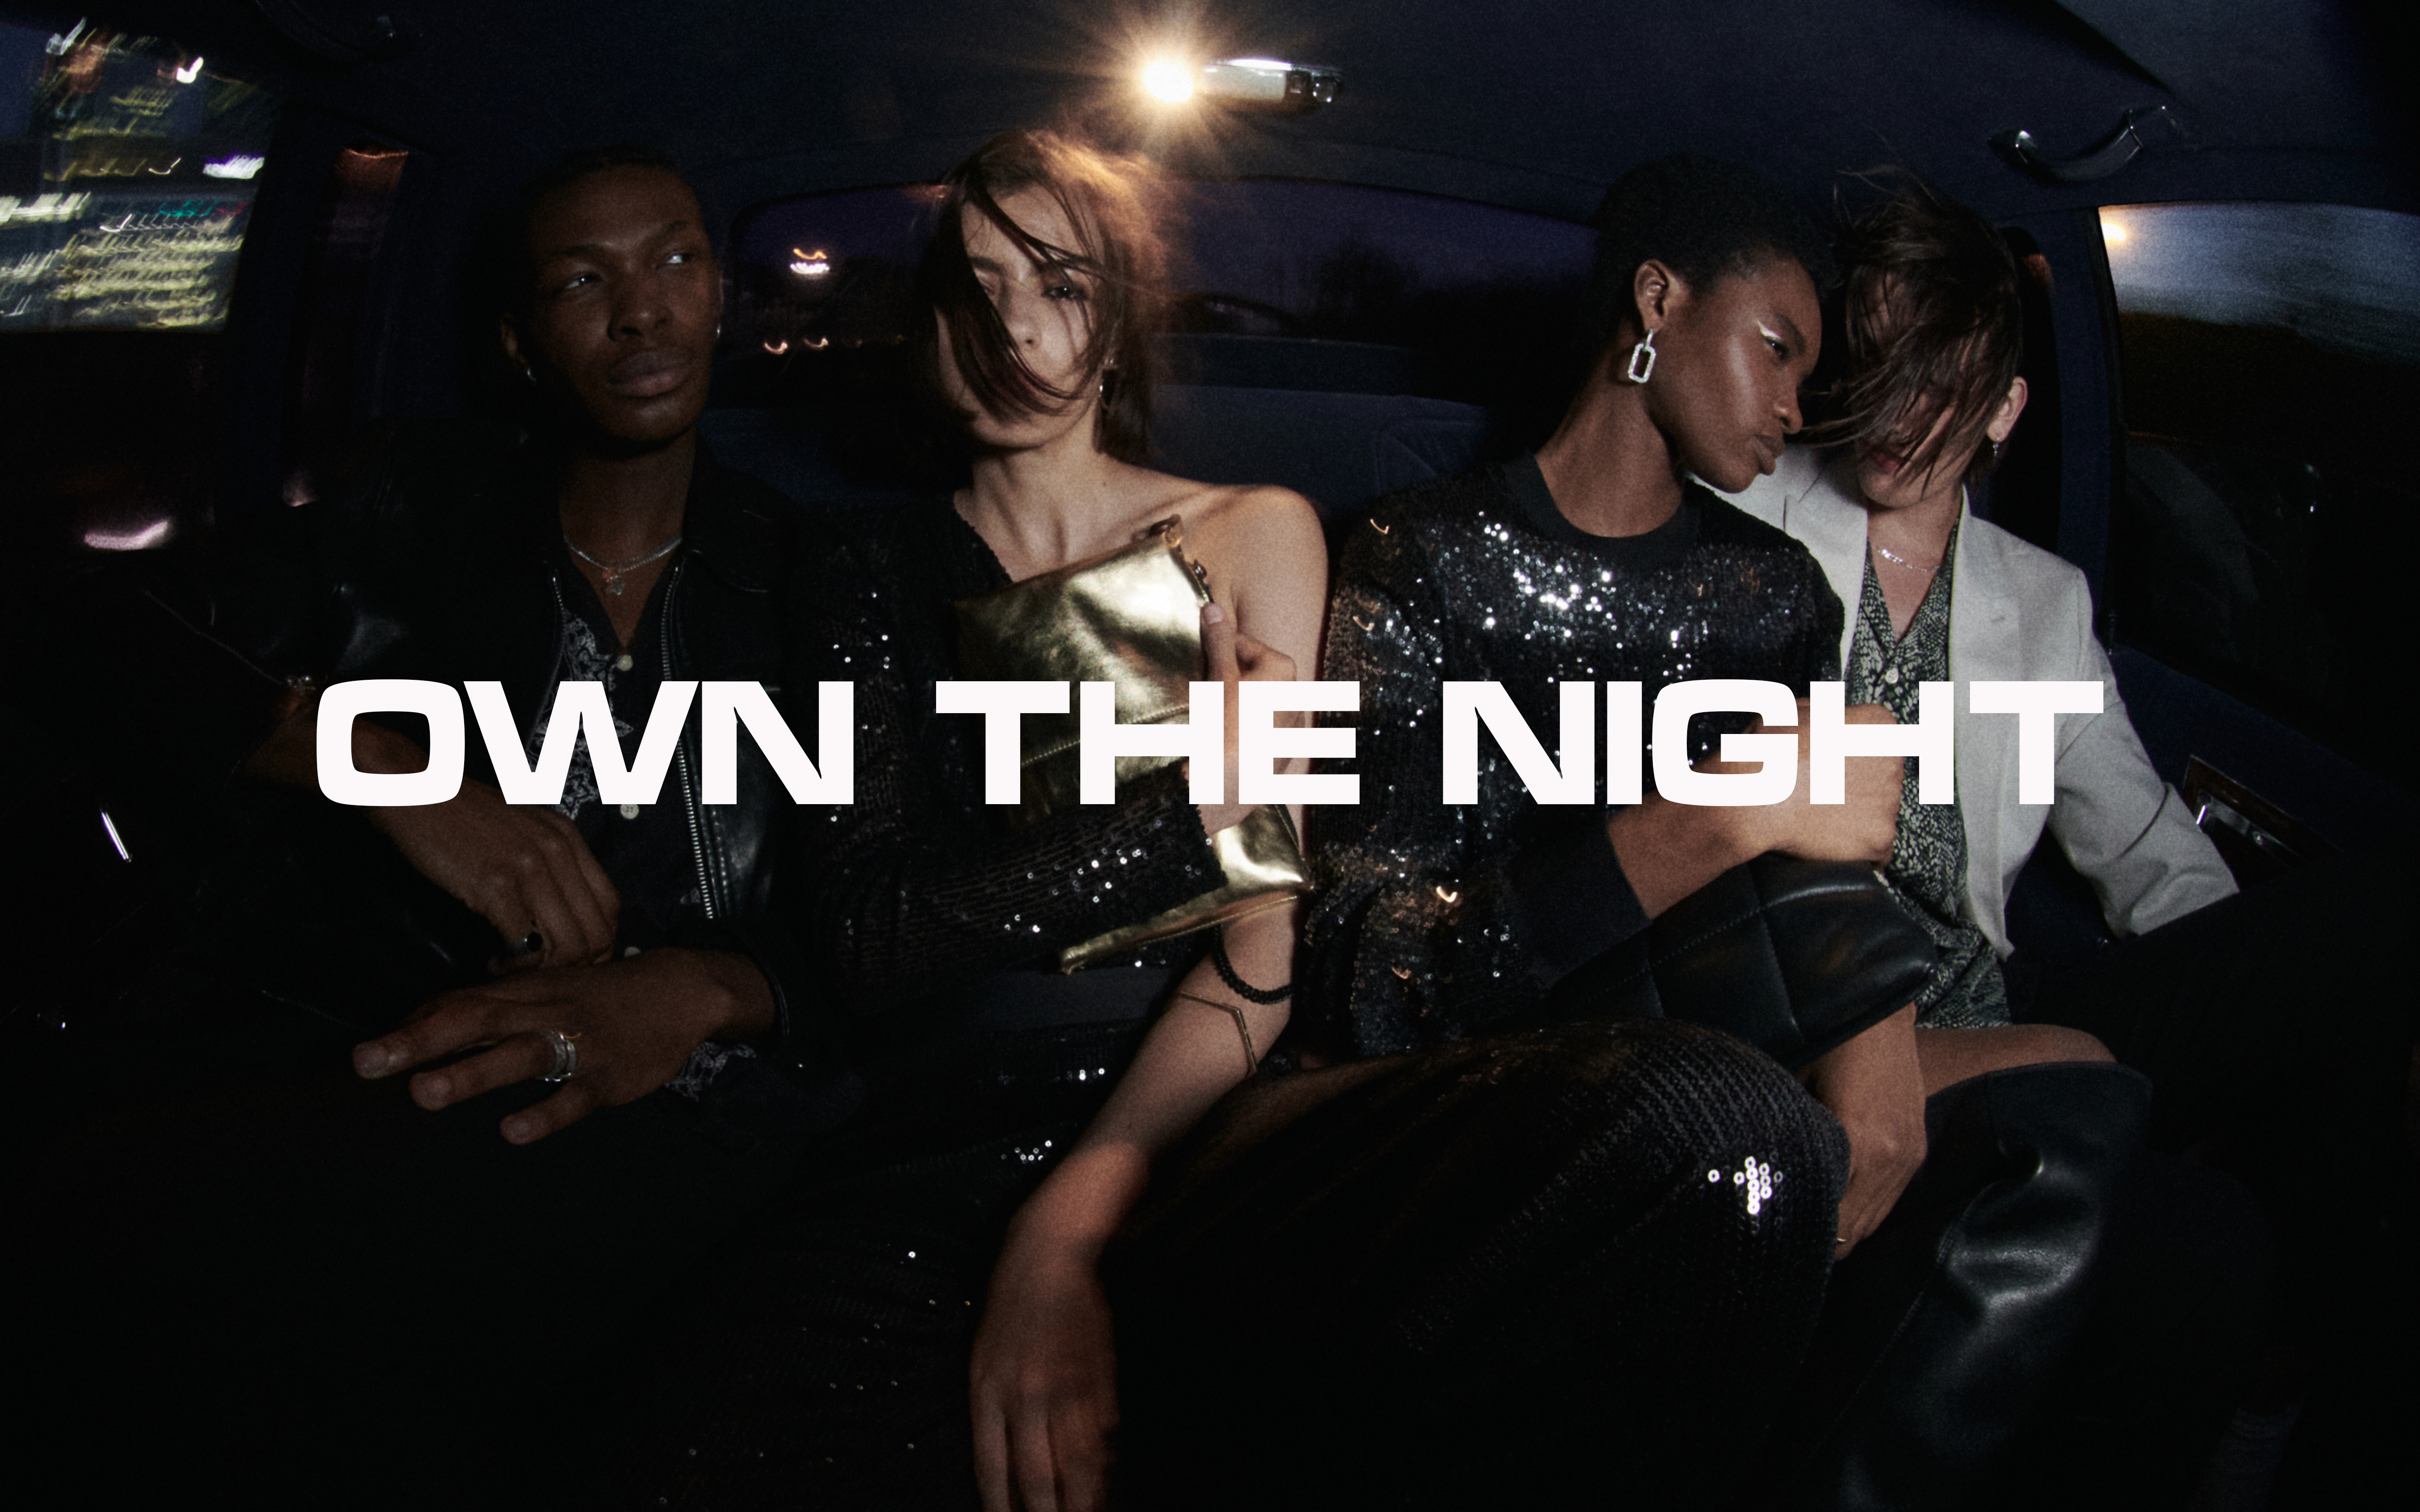 Own the night